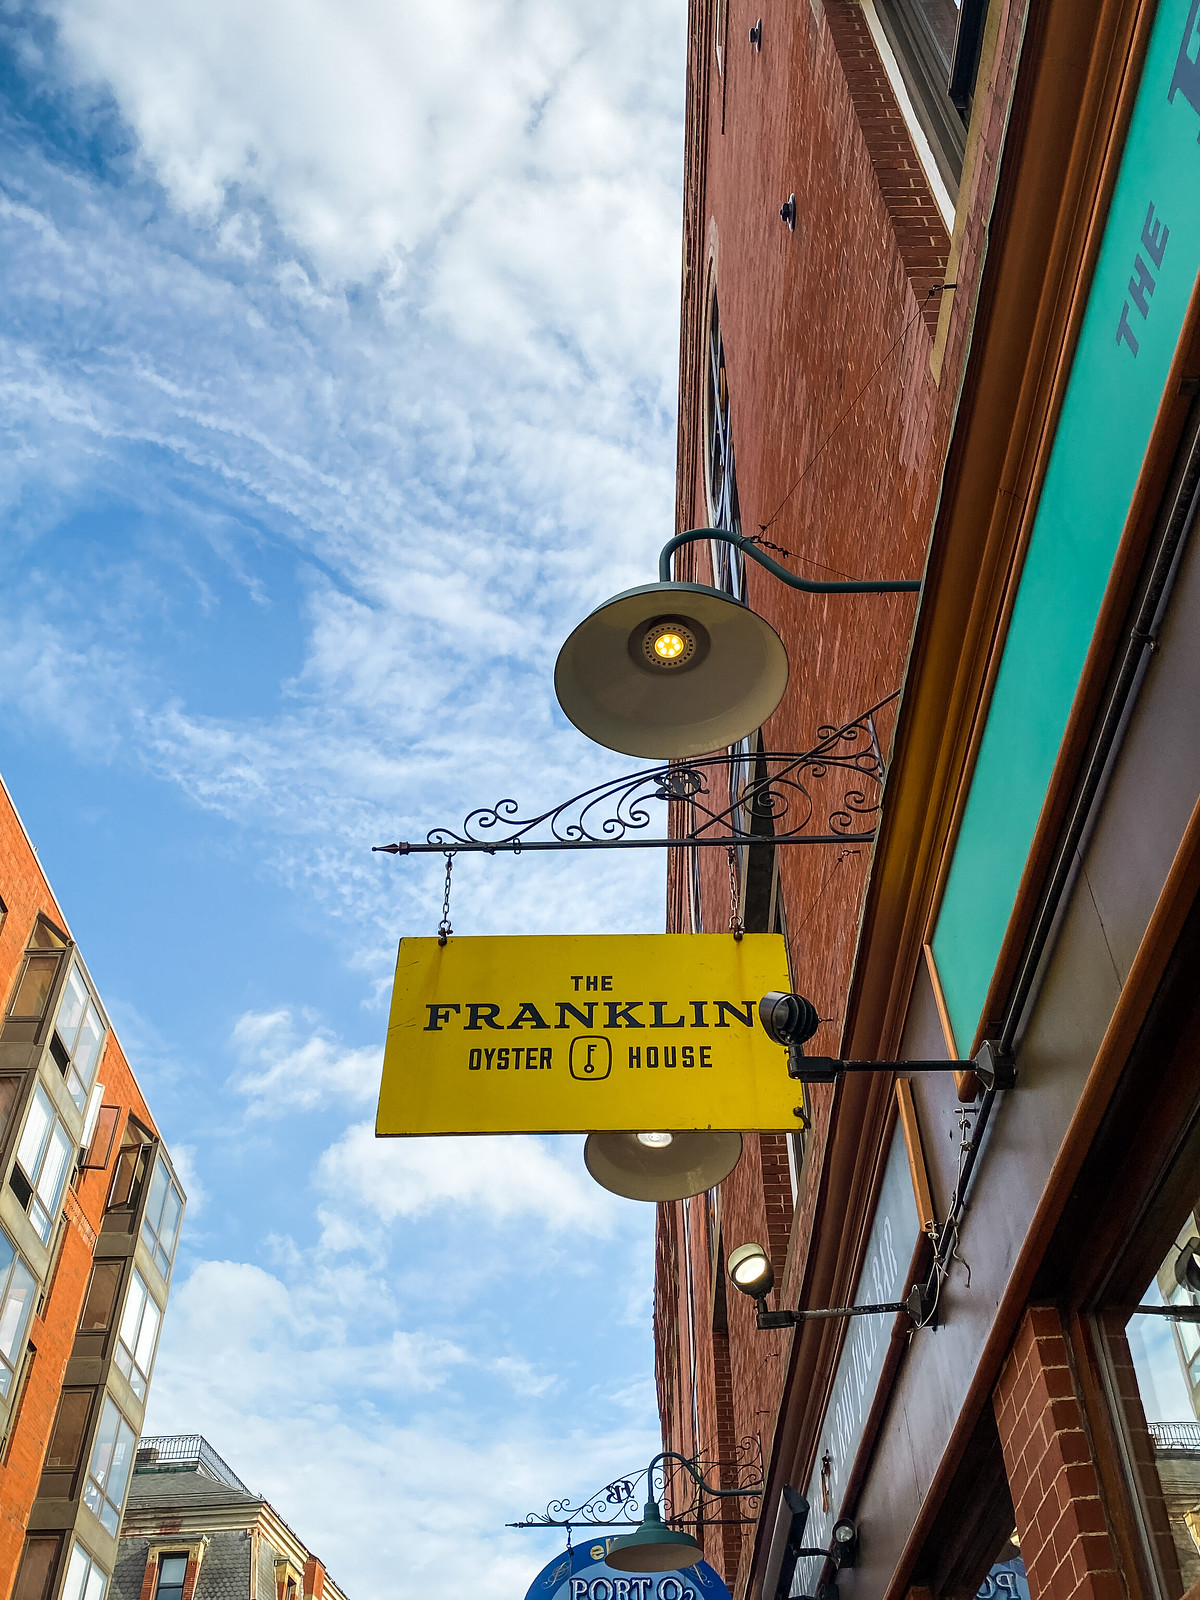 The Franklin Oyster House | Best Portsmouth Restaurants | Where to eat in Portsmouth, NH | Portsmouth New Hampshire Travel Guide | Weekend in New England | Things to do in Portsmouth